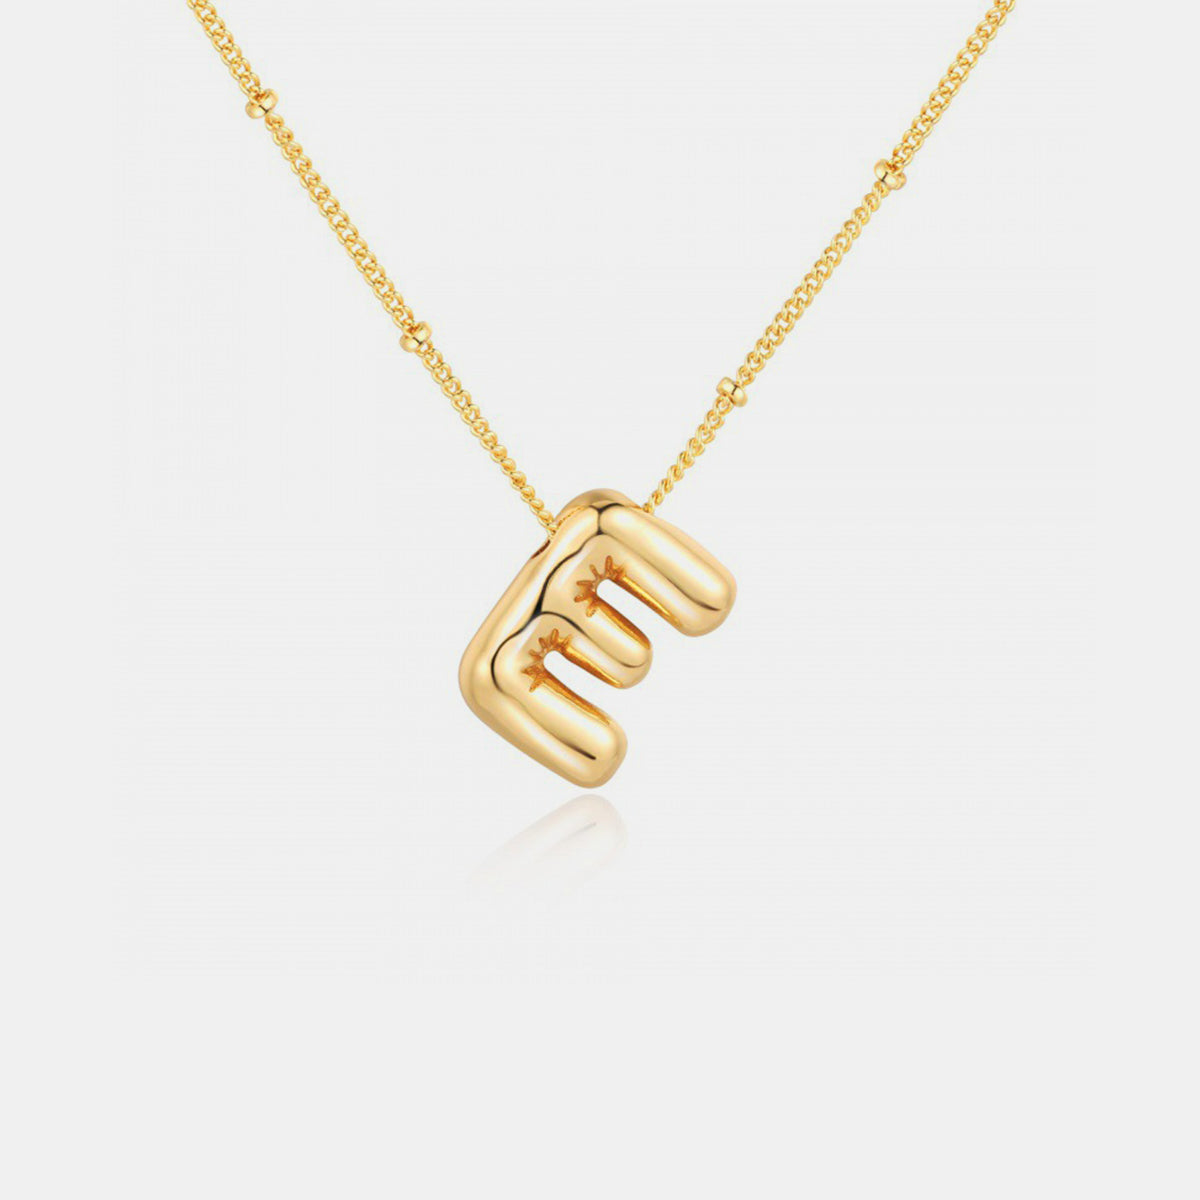 TEEK - A-J Gold-Plated Letter Necklace JEWELRY TEEK Trend Style E  